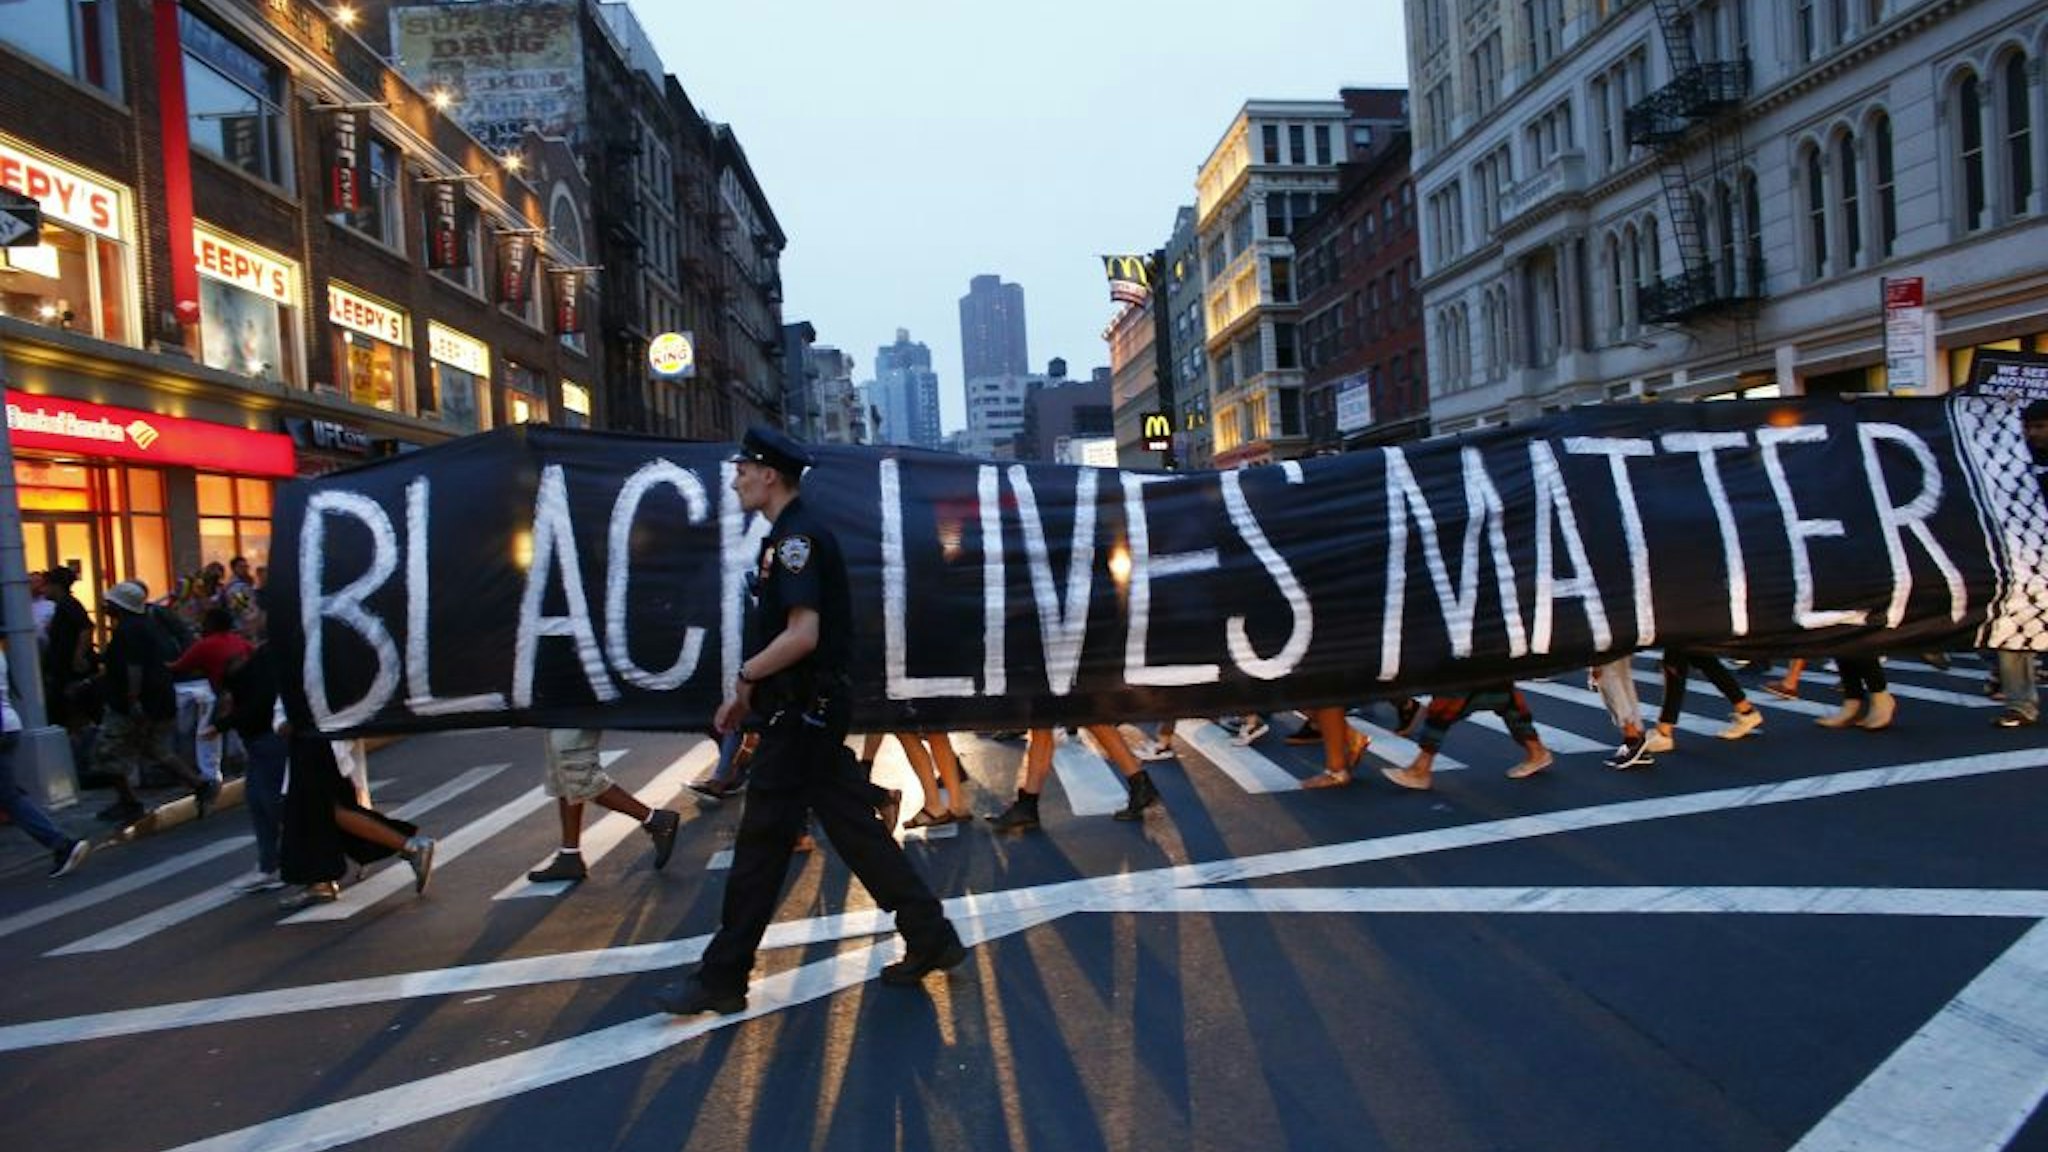 TOPSHOT - A police officer patrols during a protest in support of the Black lives matter movement in New York on July 09, 2016. - The gunman behind a sniper-style attack in Dallas was an Army veteran and loner driven to exact revenge on white officers after the recent deaths of two black men at the hands of police, authorities have said. Micah Johnson, 25, had no criminal history, Dallas police said in a statement. (Photo by KENA BETANCUR / AFP) (Photo by KENA BETANCUR/AFP via Getty Images)